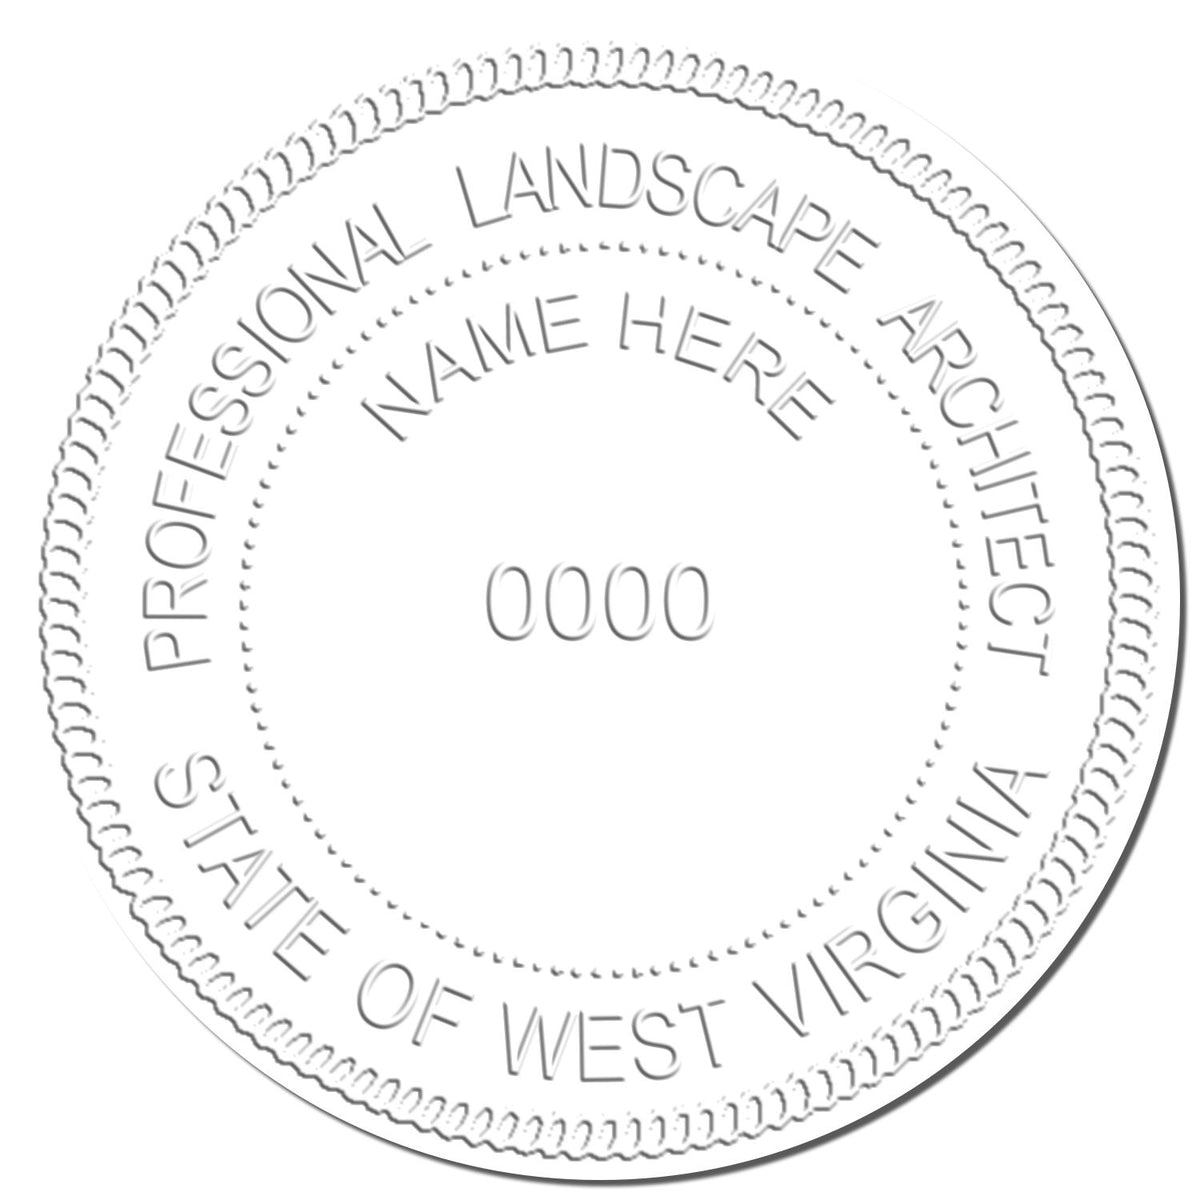 This paper is stamped with a sample imprint of the Hybrid West Virginia Landscape Architect Seal, signifying its quality and reliability.